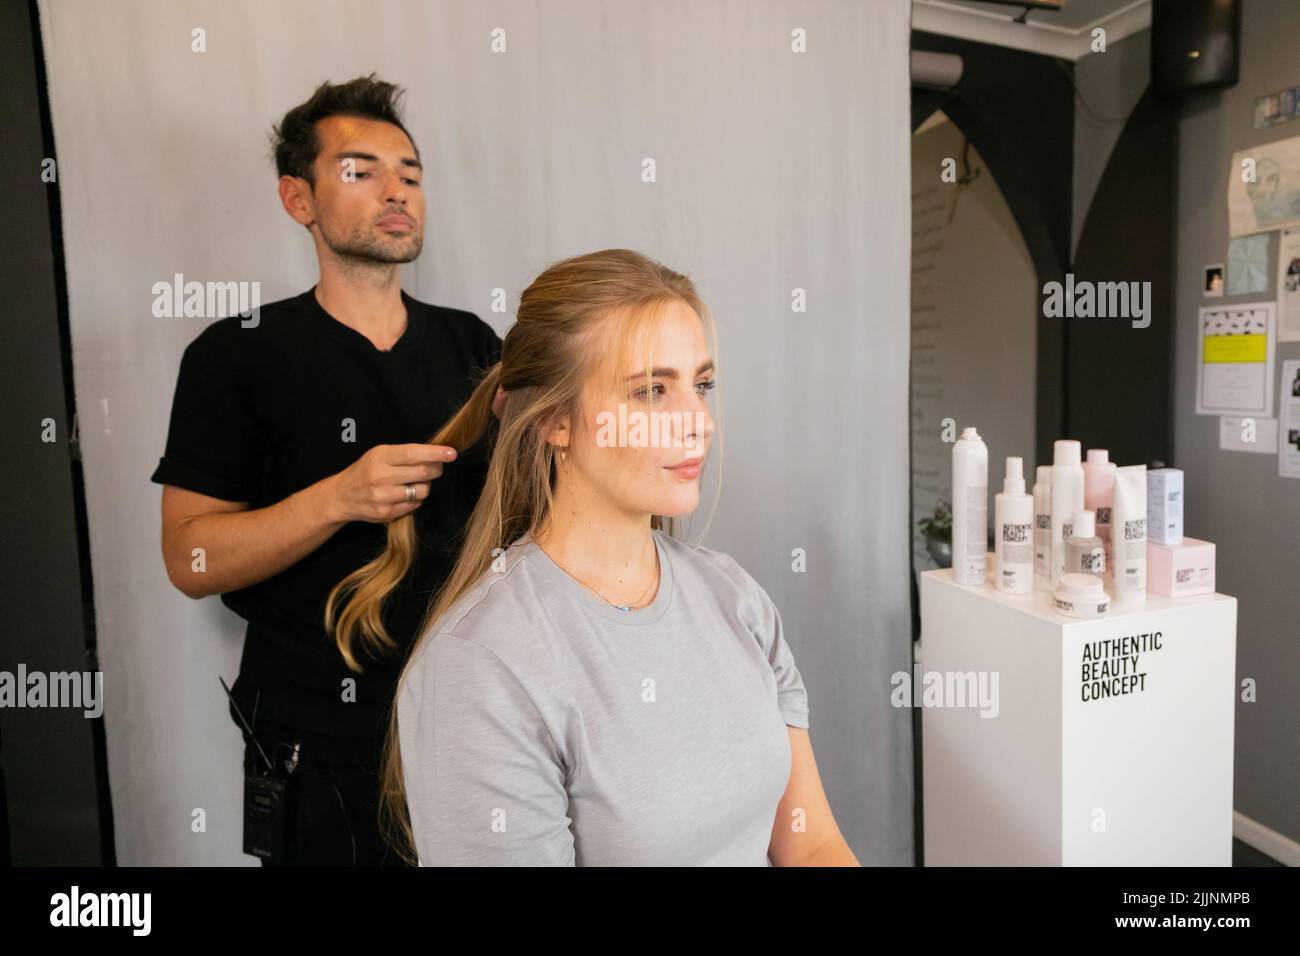 A celebrity hairstylist Marios Atzemoglou using Authentic Beauty Concept products Stock Photo